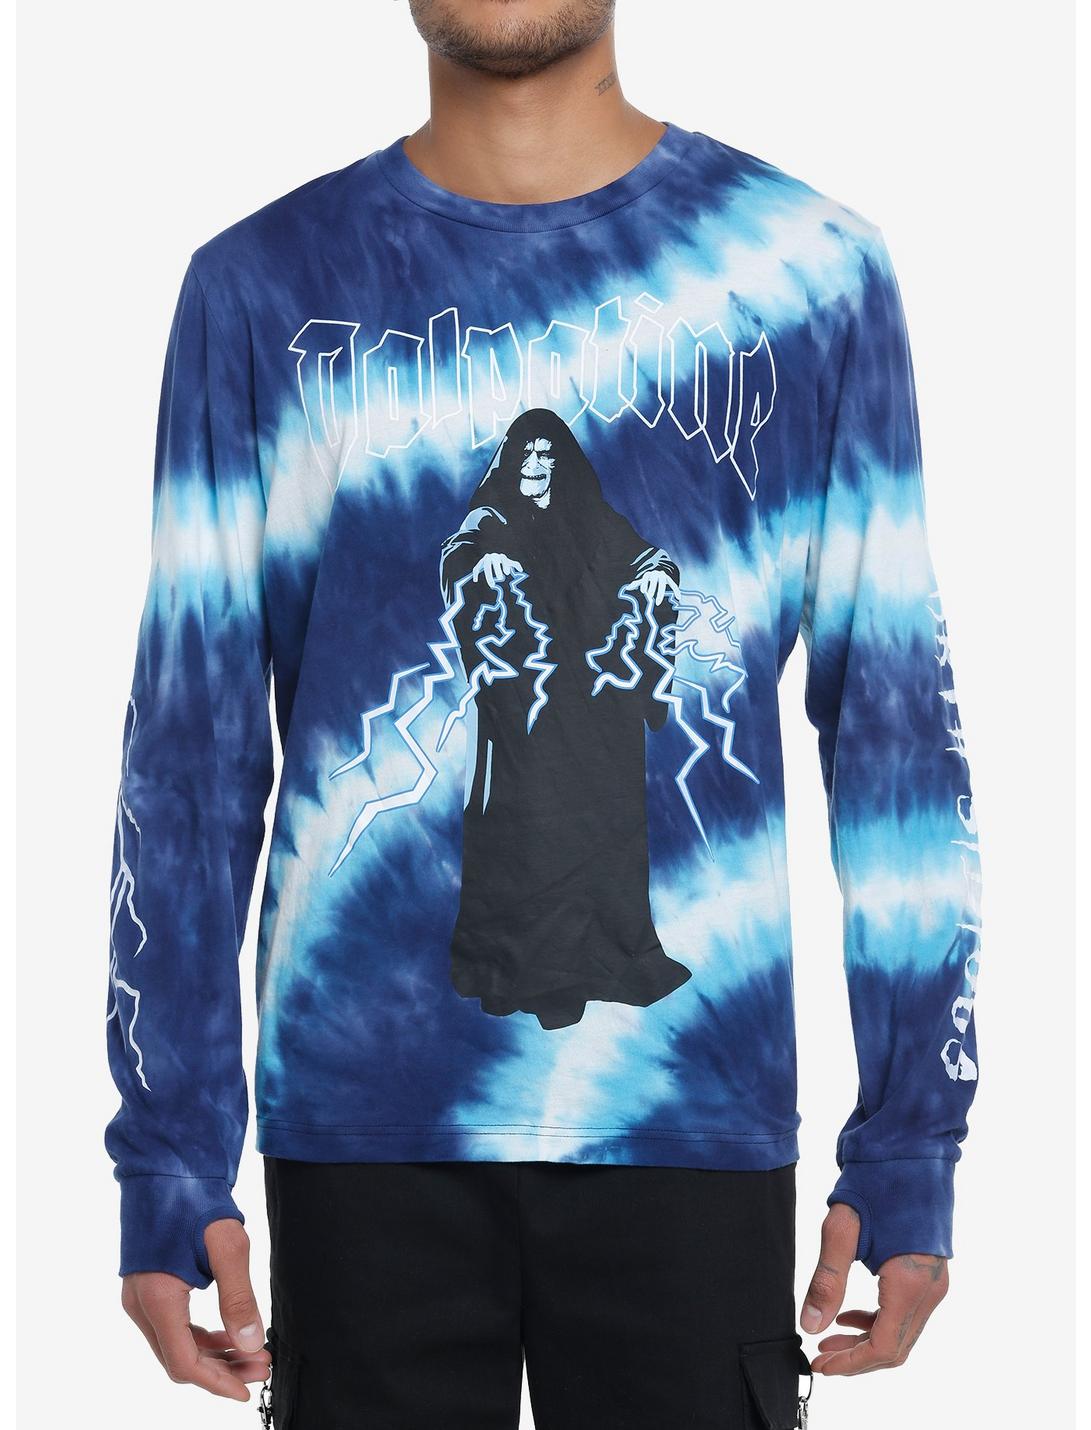 Our Universe Star Wars Emperor Palpatine Tie-Dye Long-Sleeve T-Shirt, MULTI, hi-res